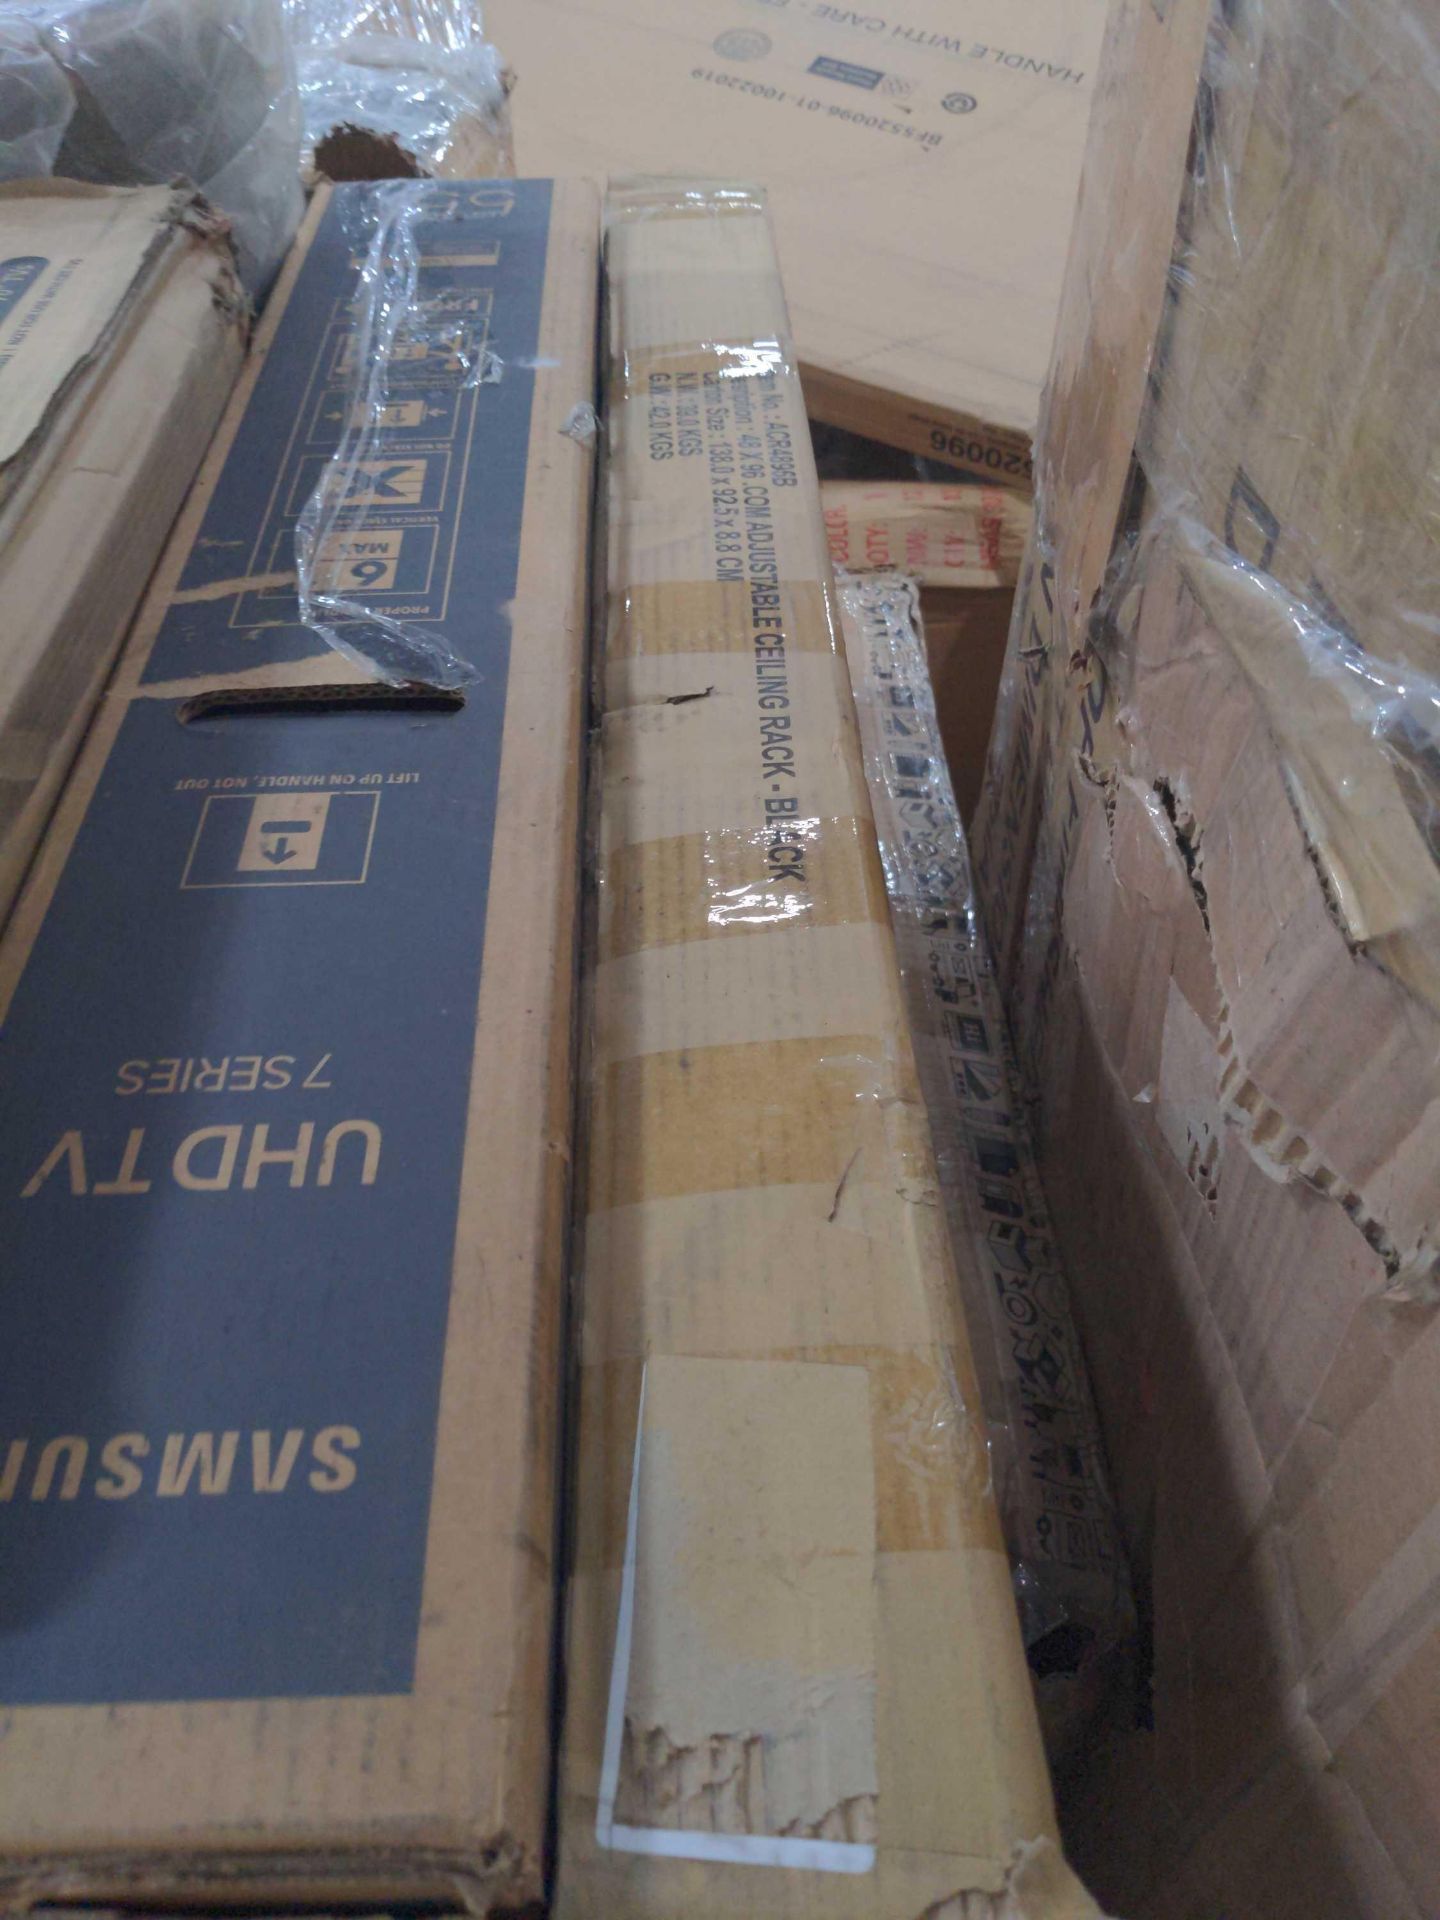 Two Pallets - Image 8 of 20